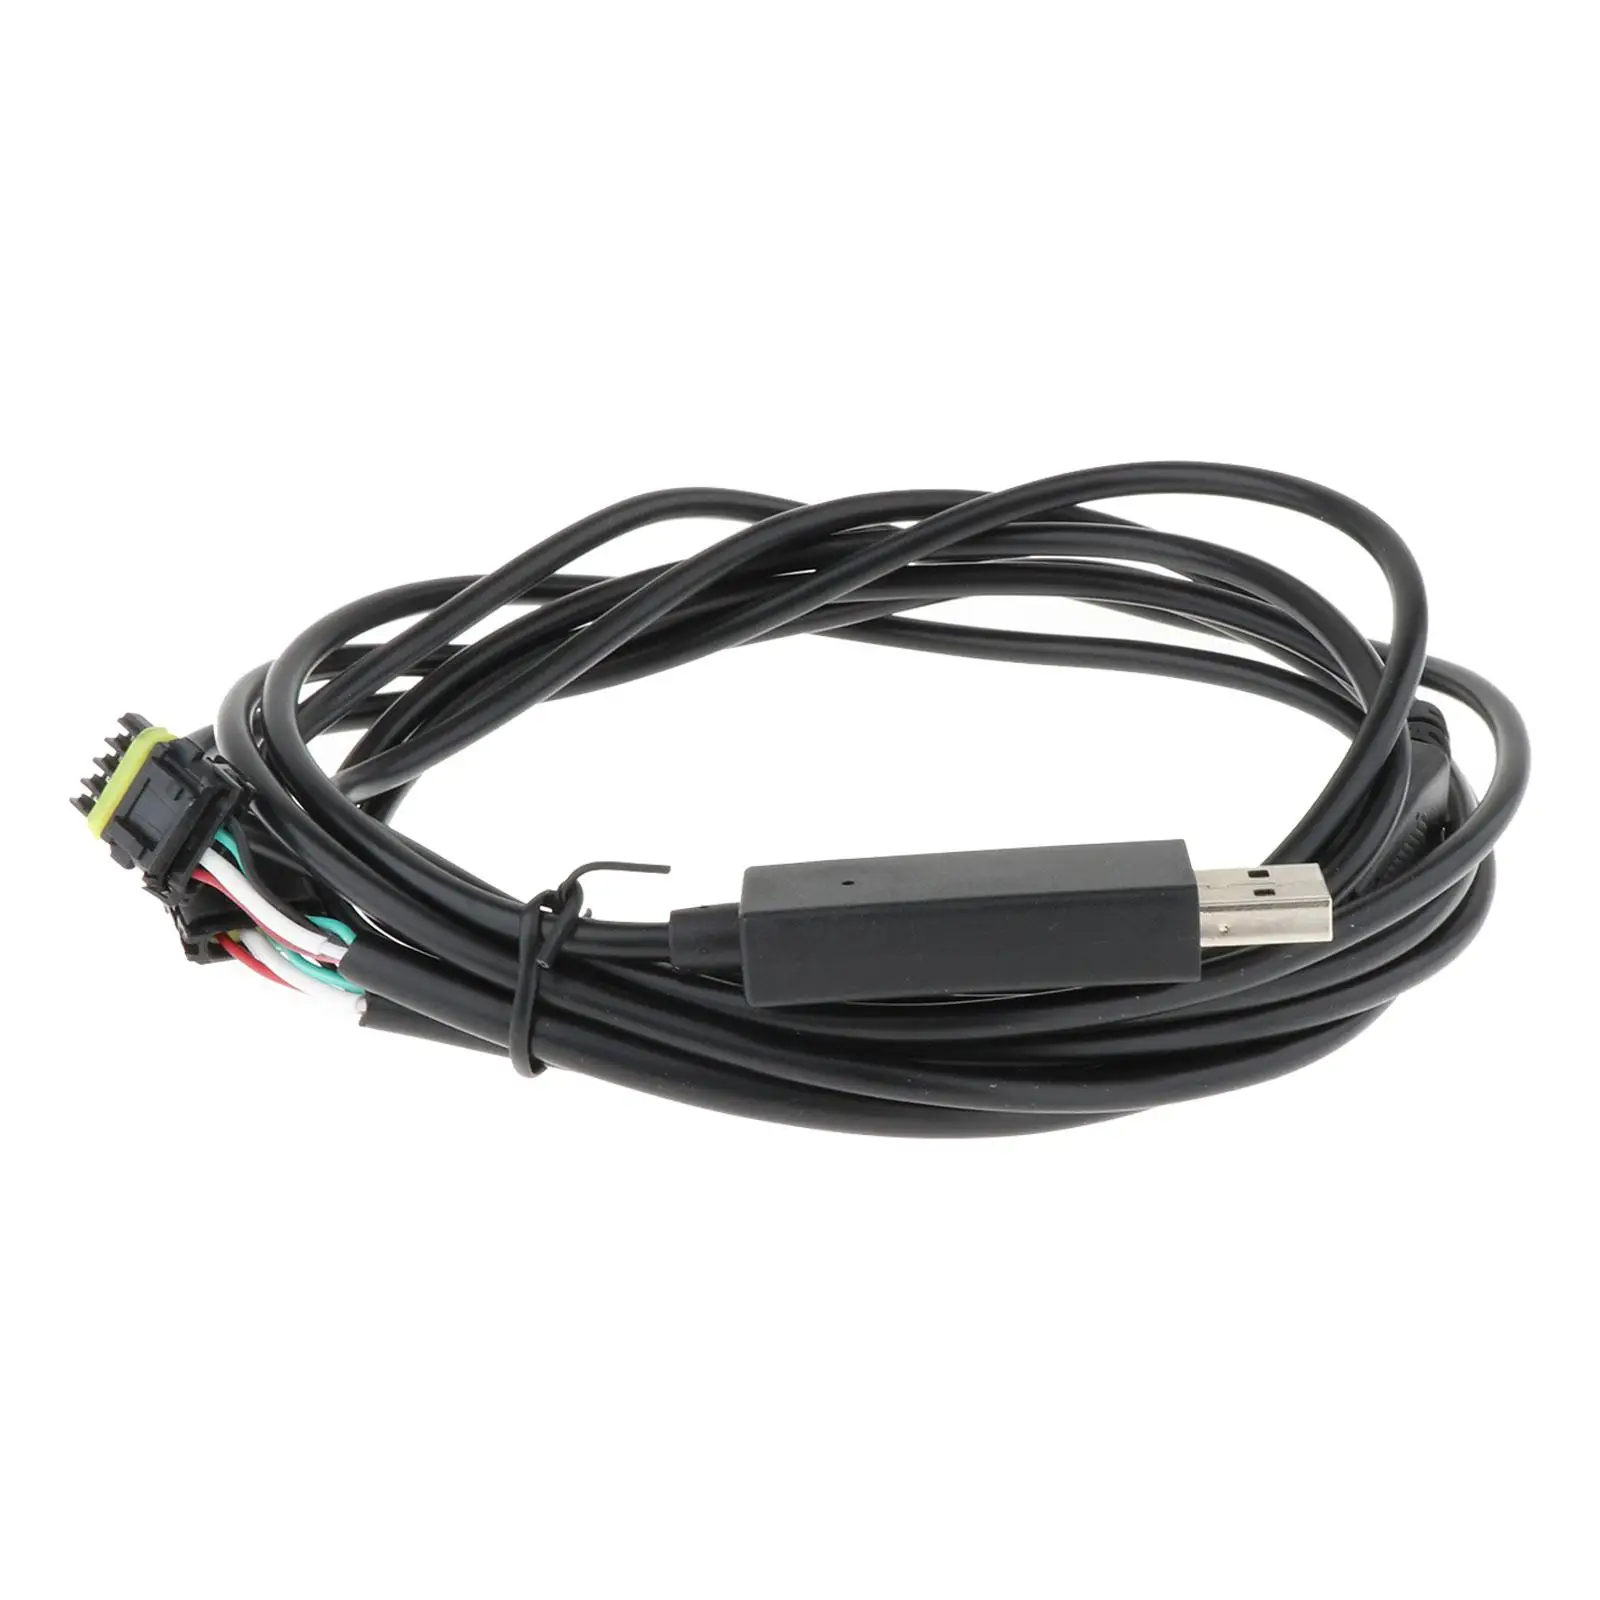 

USB Can Communication Cable 558-443-2 Y Splitter Cable Cord for Holley Efi